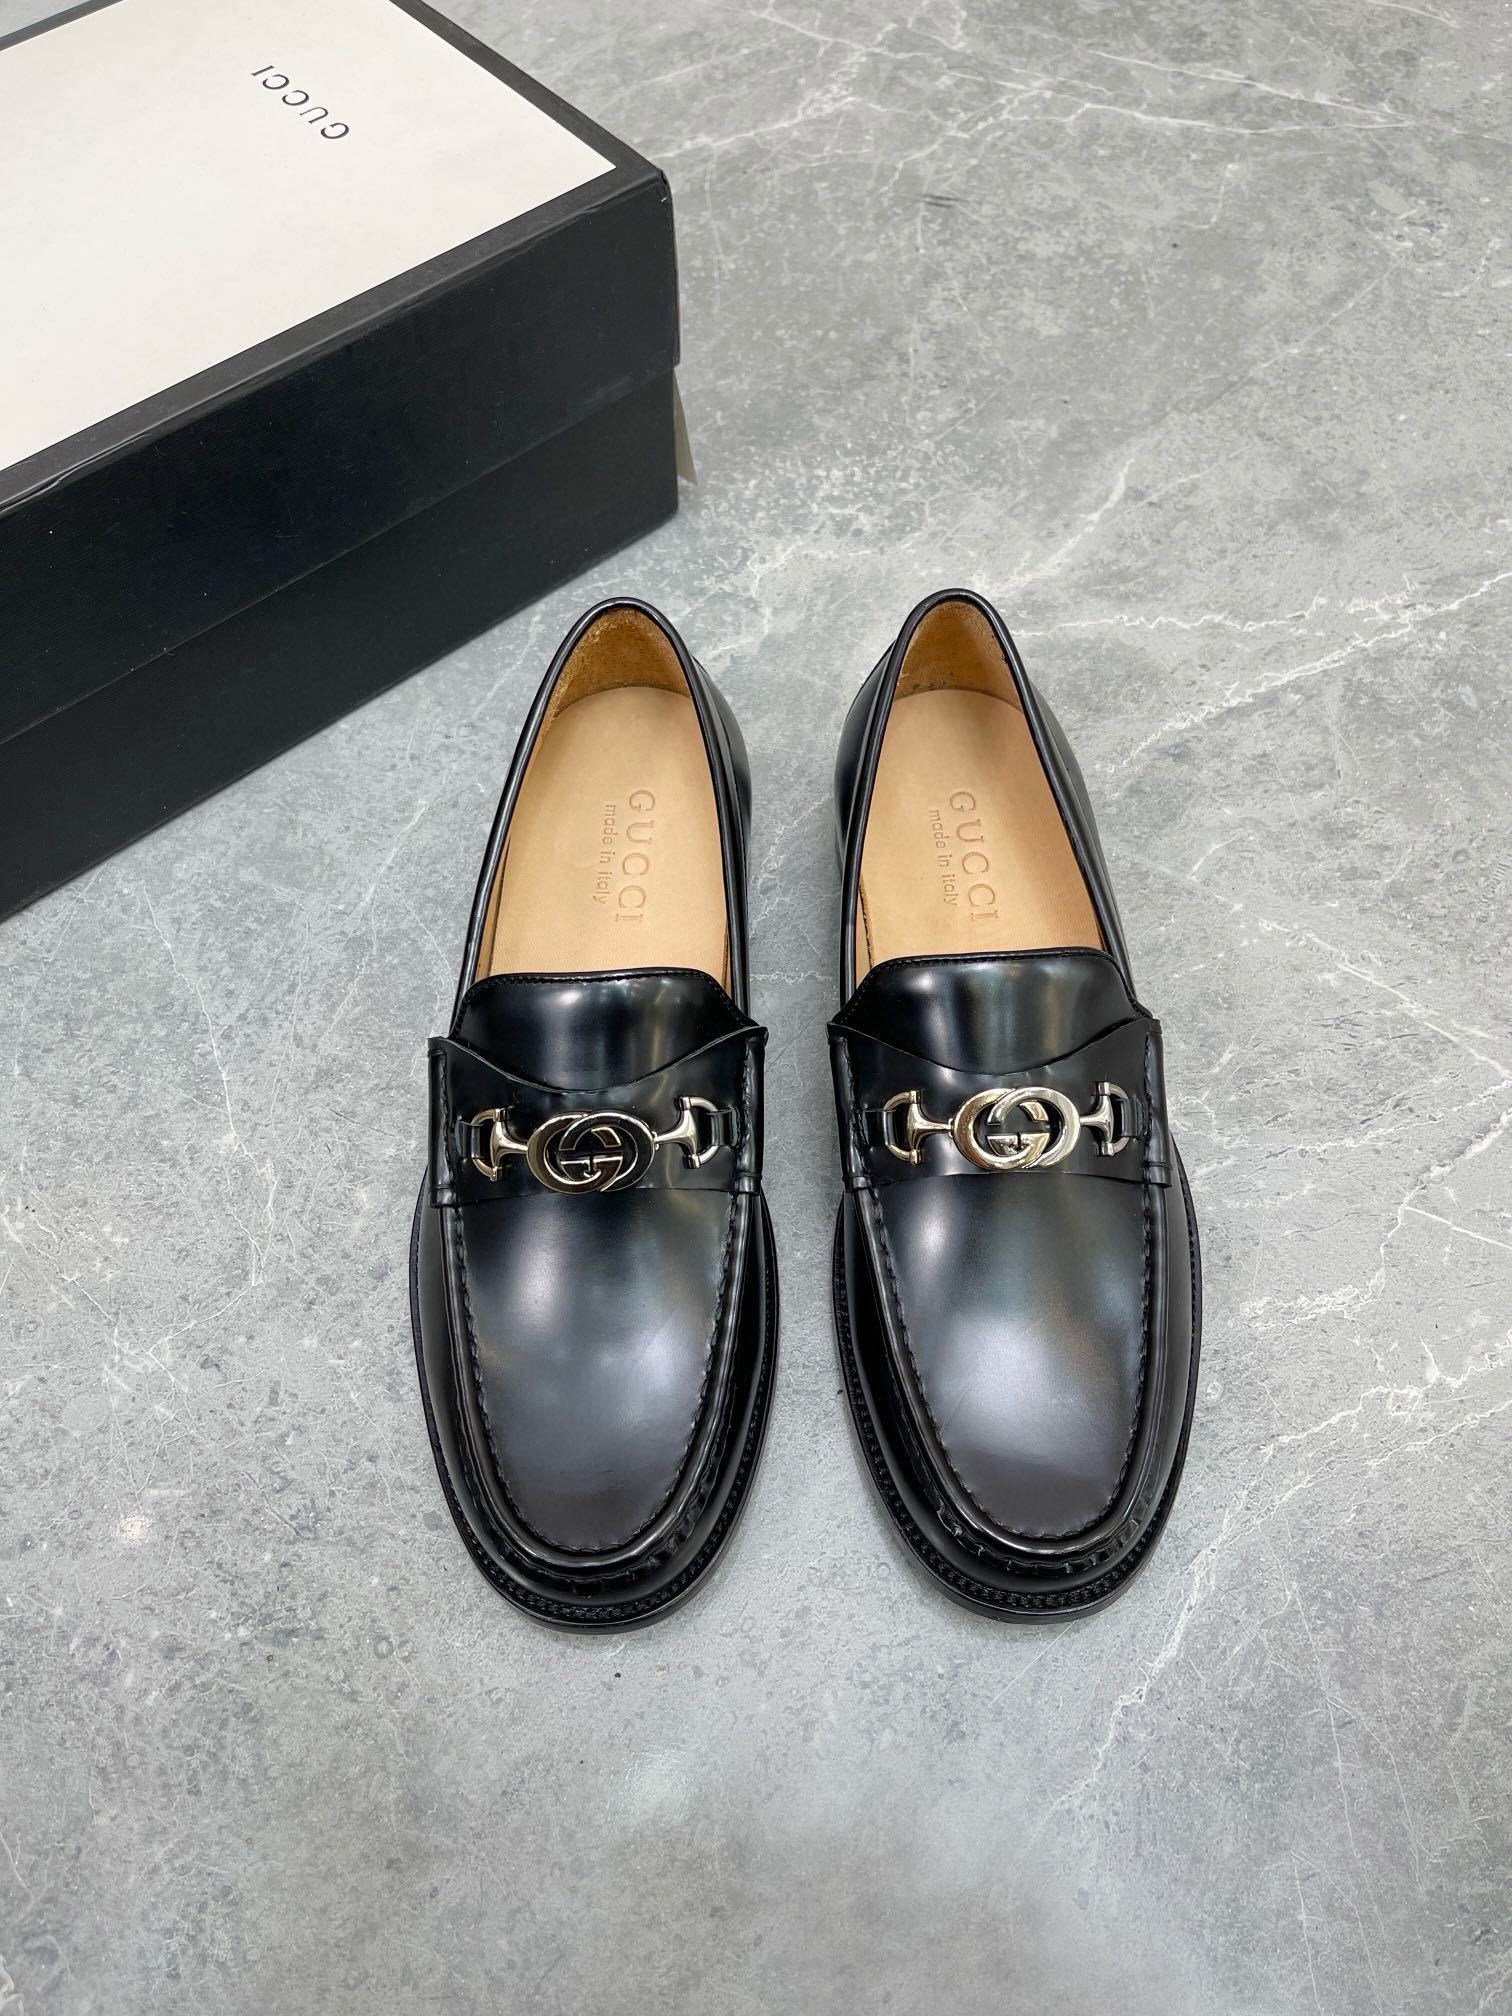 Gucci Sale
 Shoes Loafers Men Cowhide Genuine Leather Casual